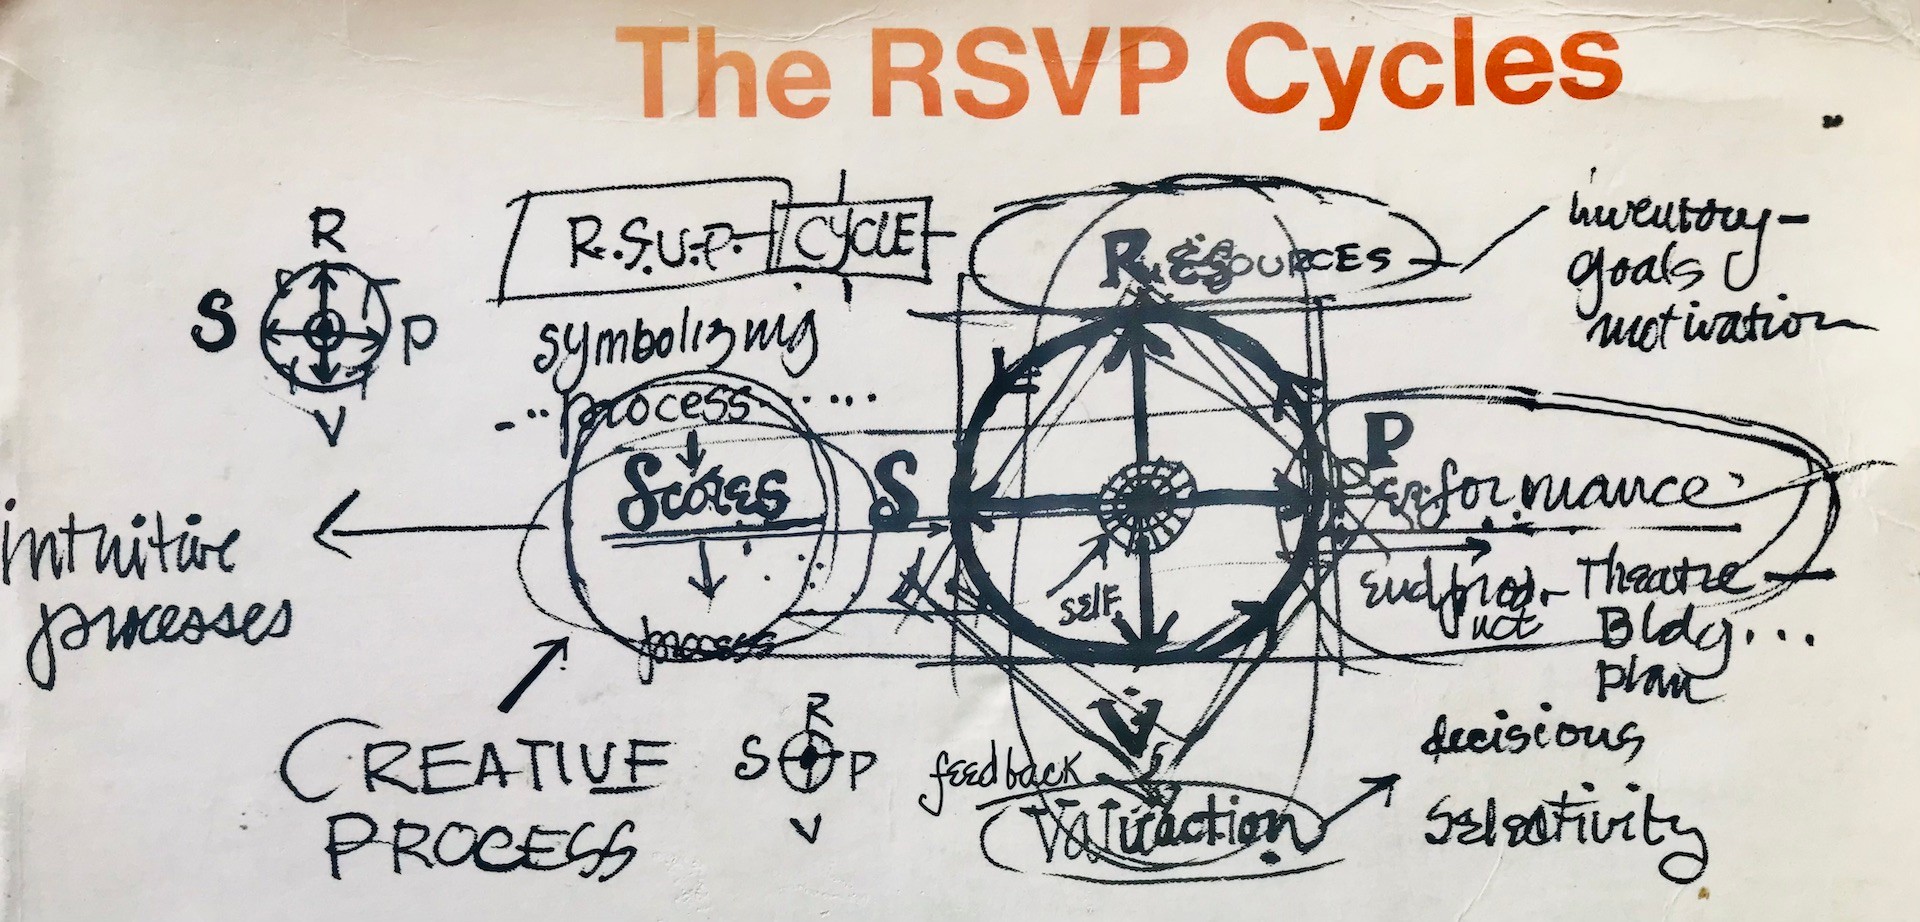 The RSVP Cycles